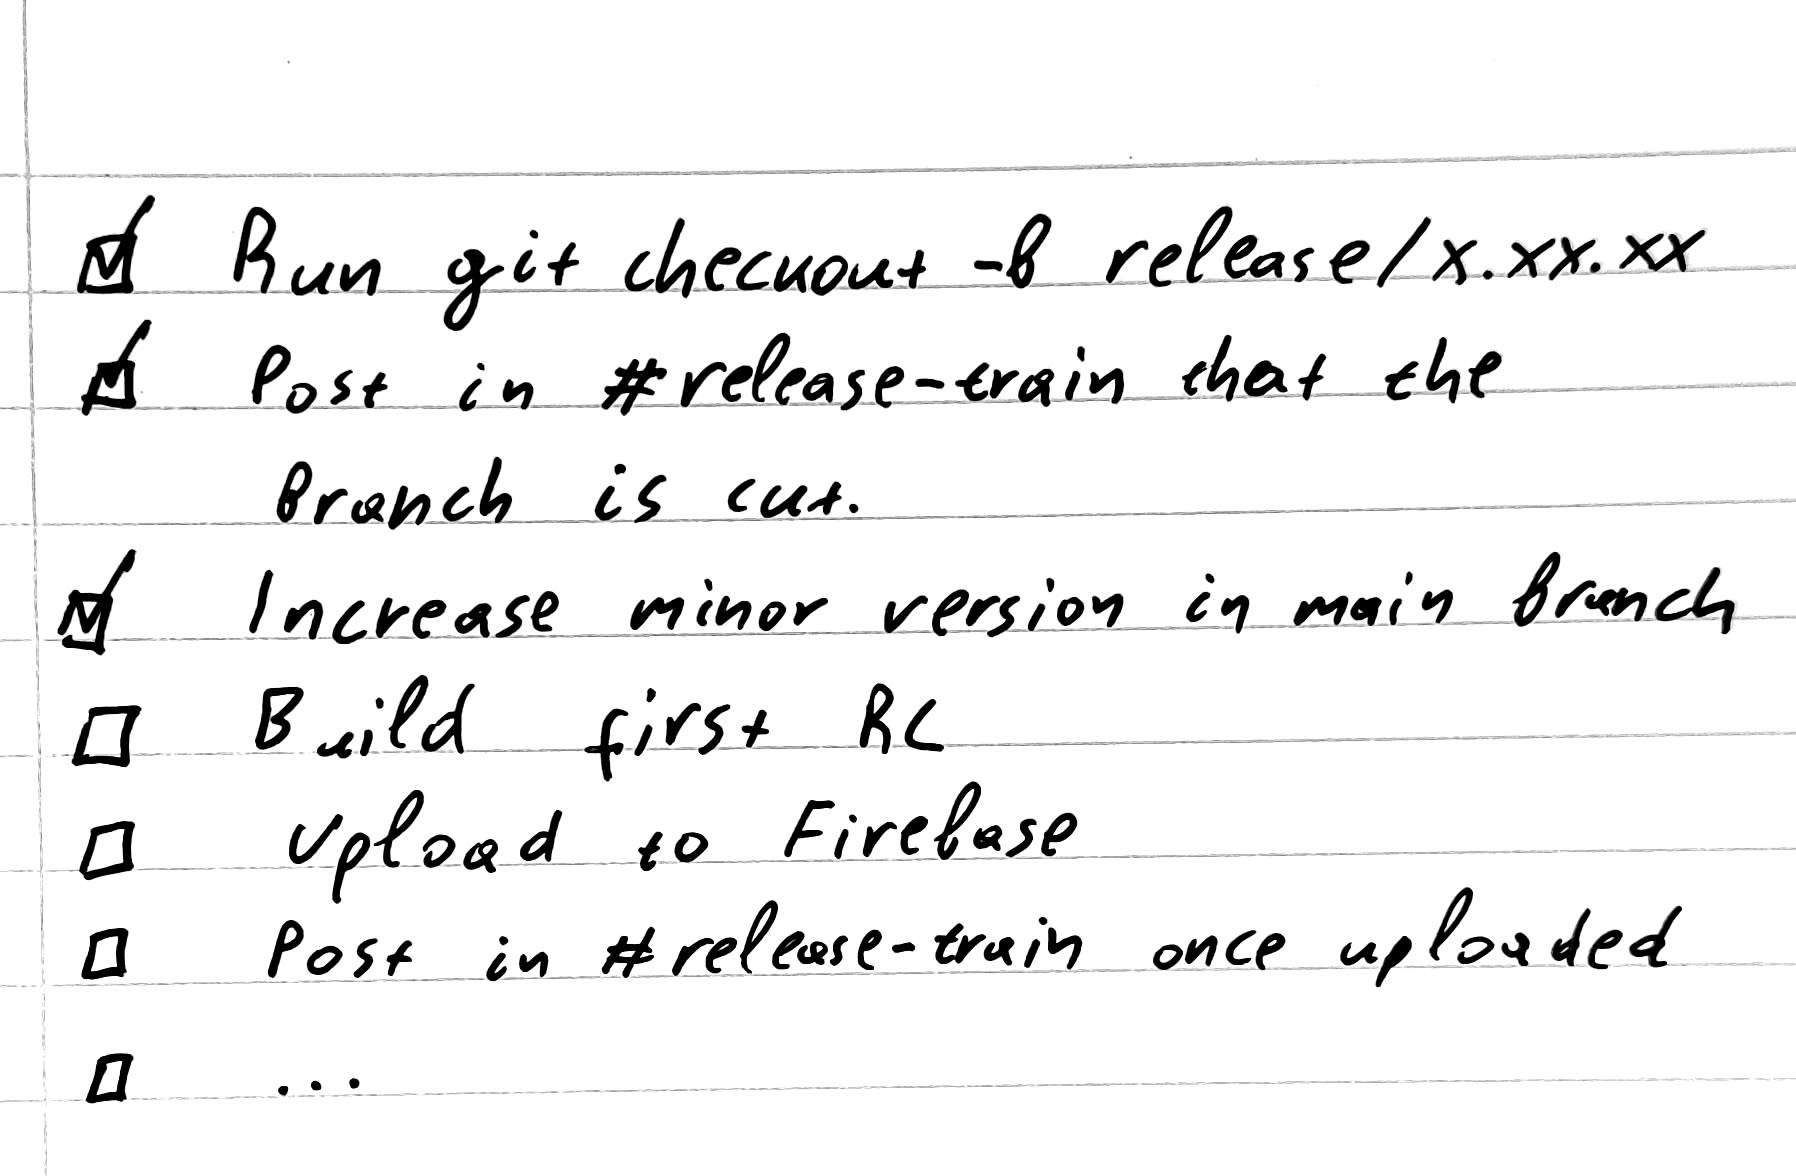 Image of a checklist: 1. Run git checkout - release/x.xx.xx 2. Post in #release-train that the branch is cut 3. Increase minor version in main branch 4. Build first R 5. Upload to Firebase 6. Post in #release-train once uploaded